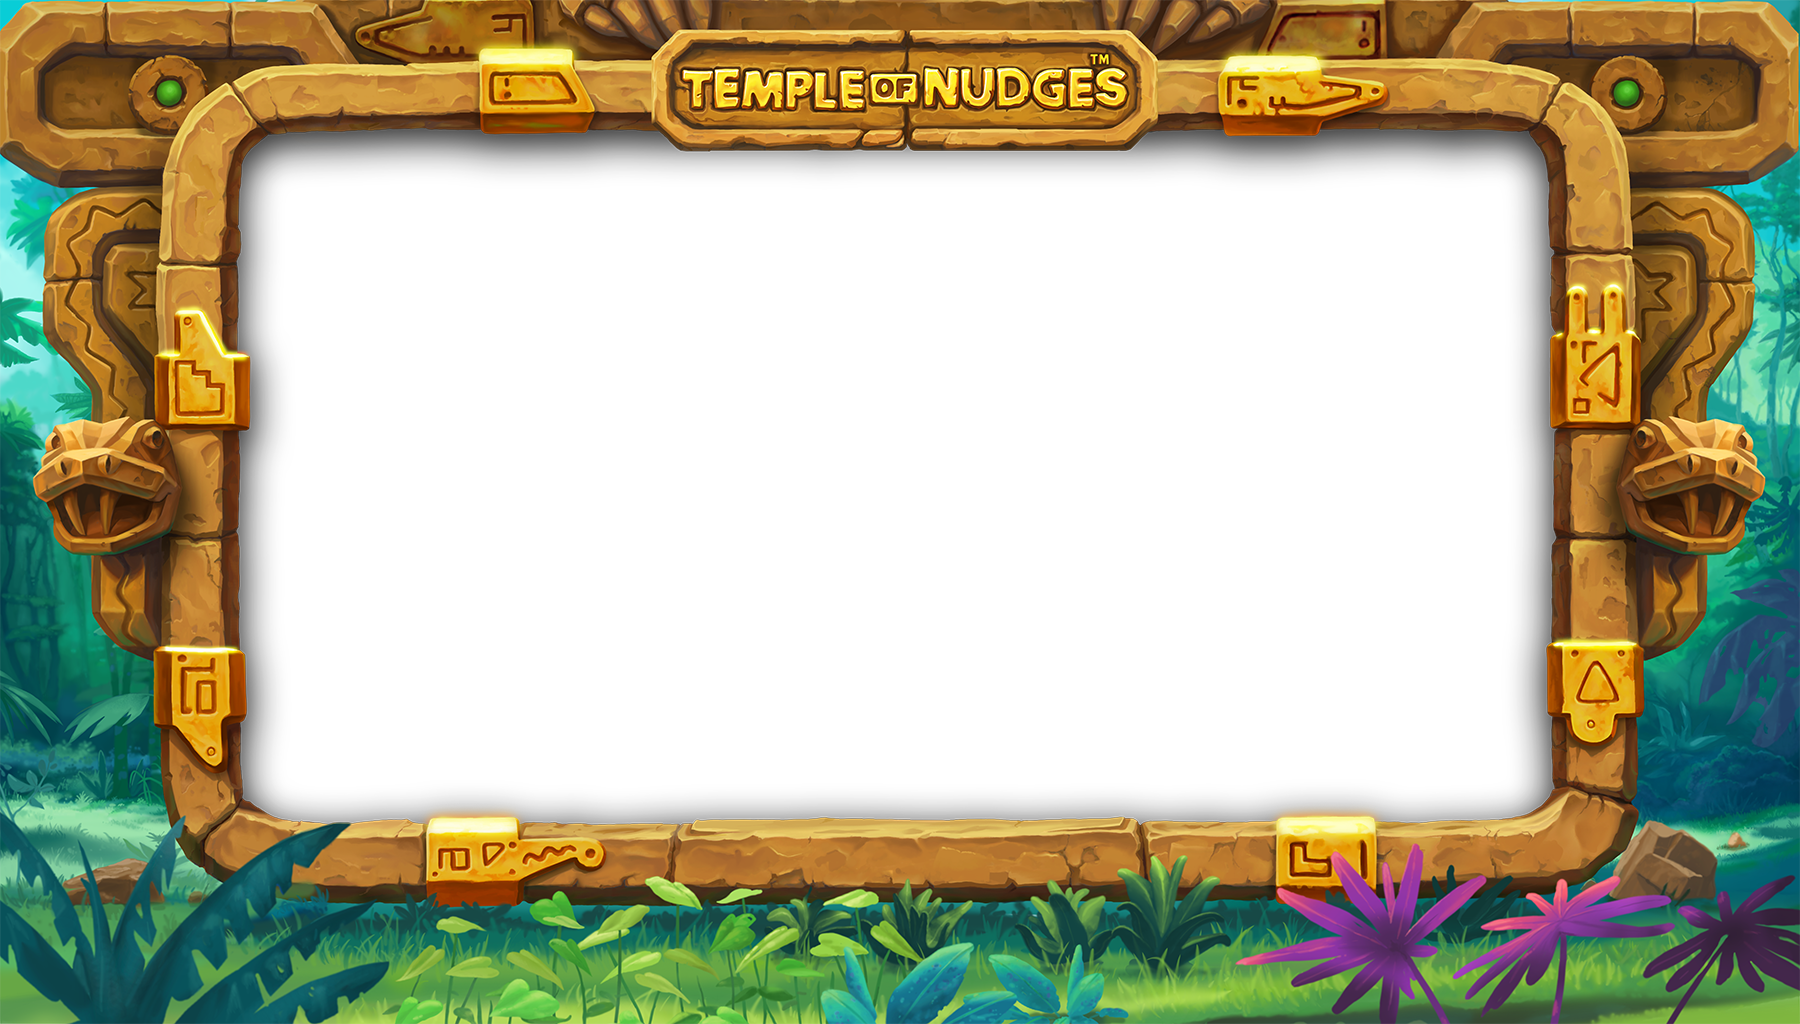 12_background_blurred_foreground_horz_templeofnudges.png thumbnail